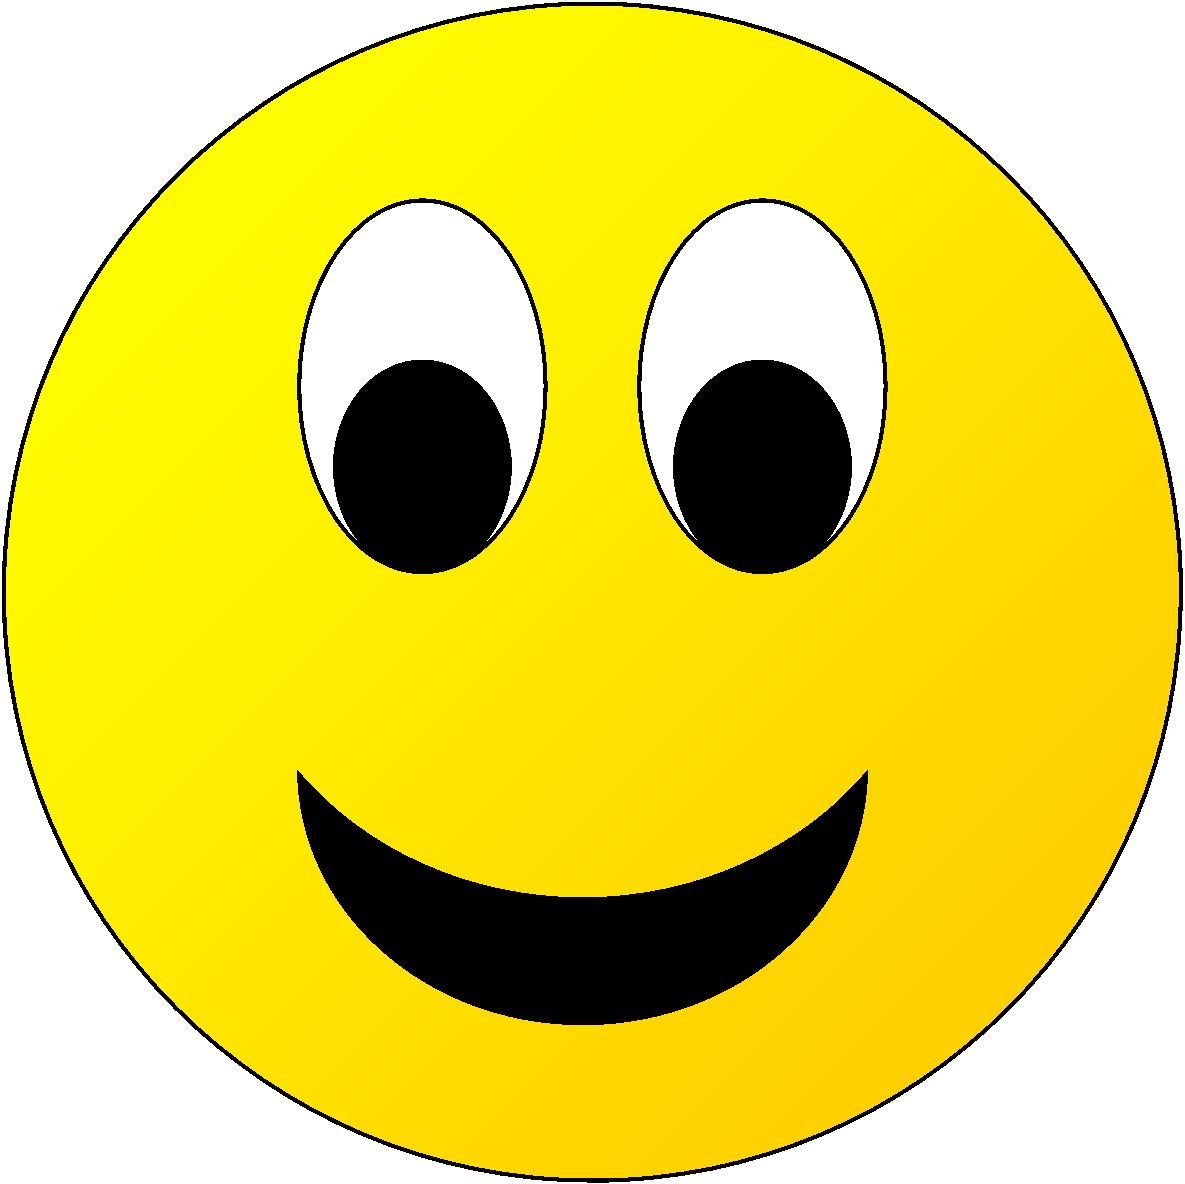 5 animated laughing smileys. Free cliparts that you can download to you computer and use in your designs. Animated Emoticon